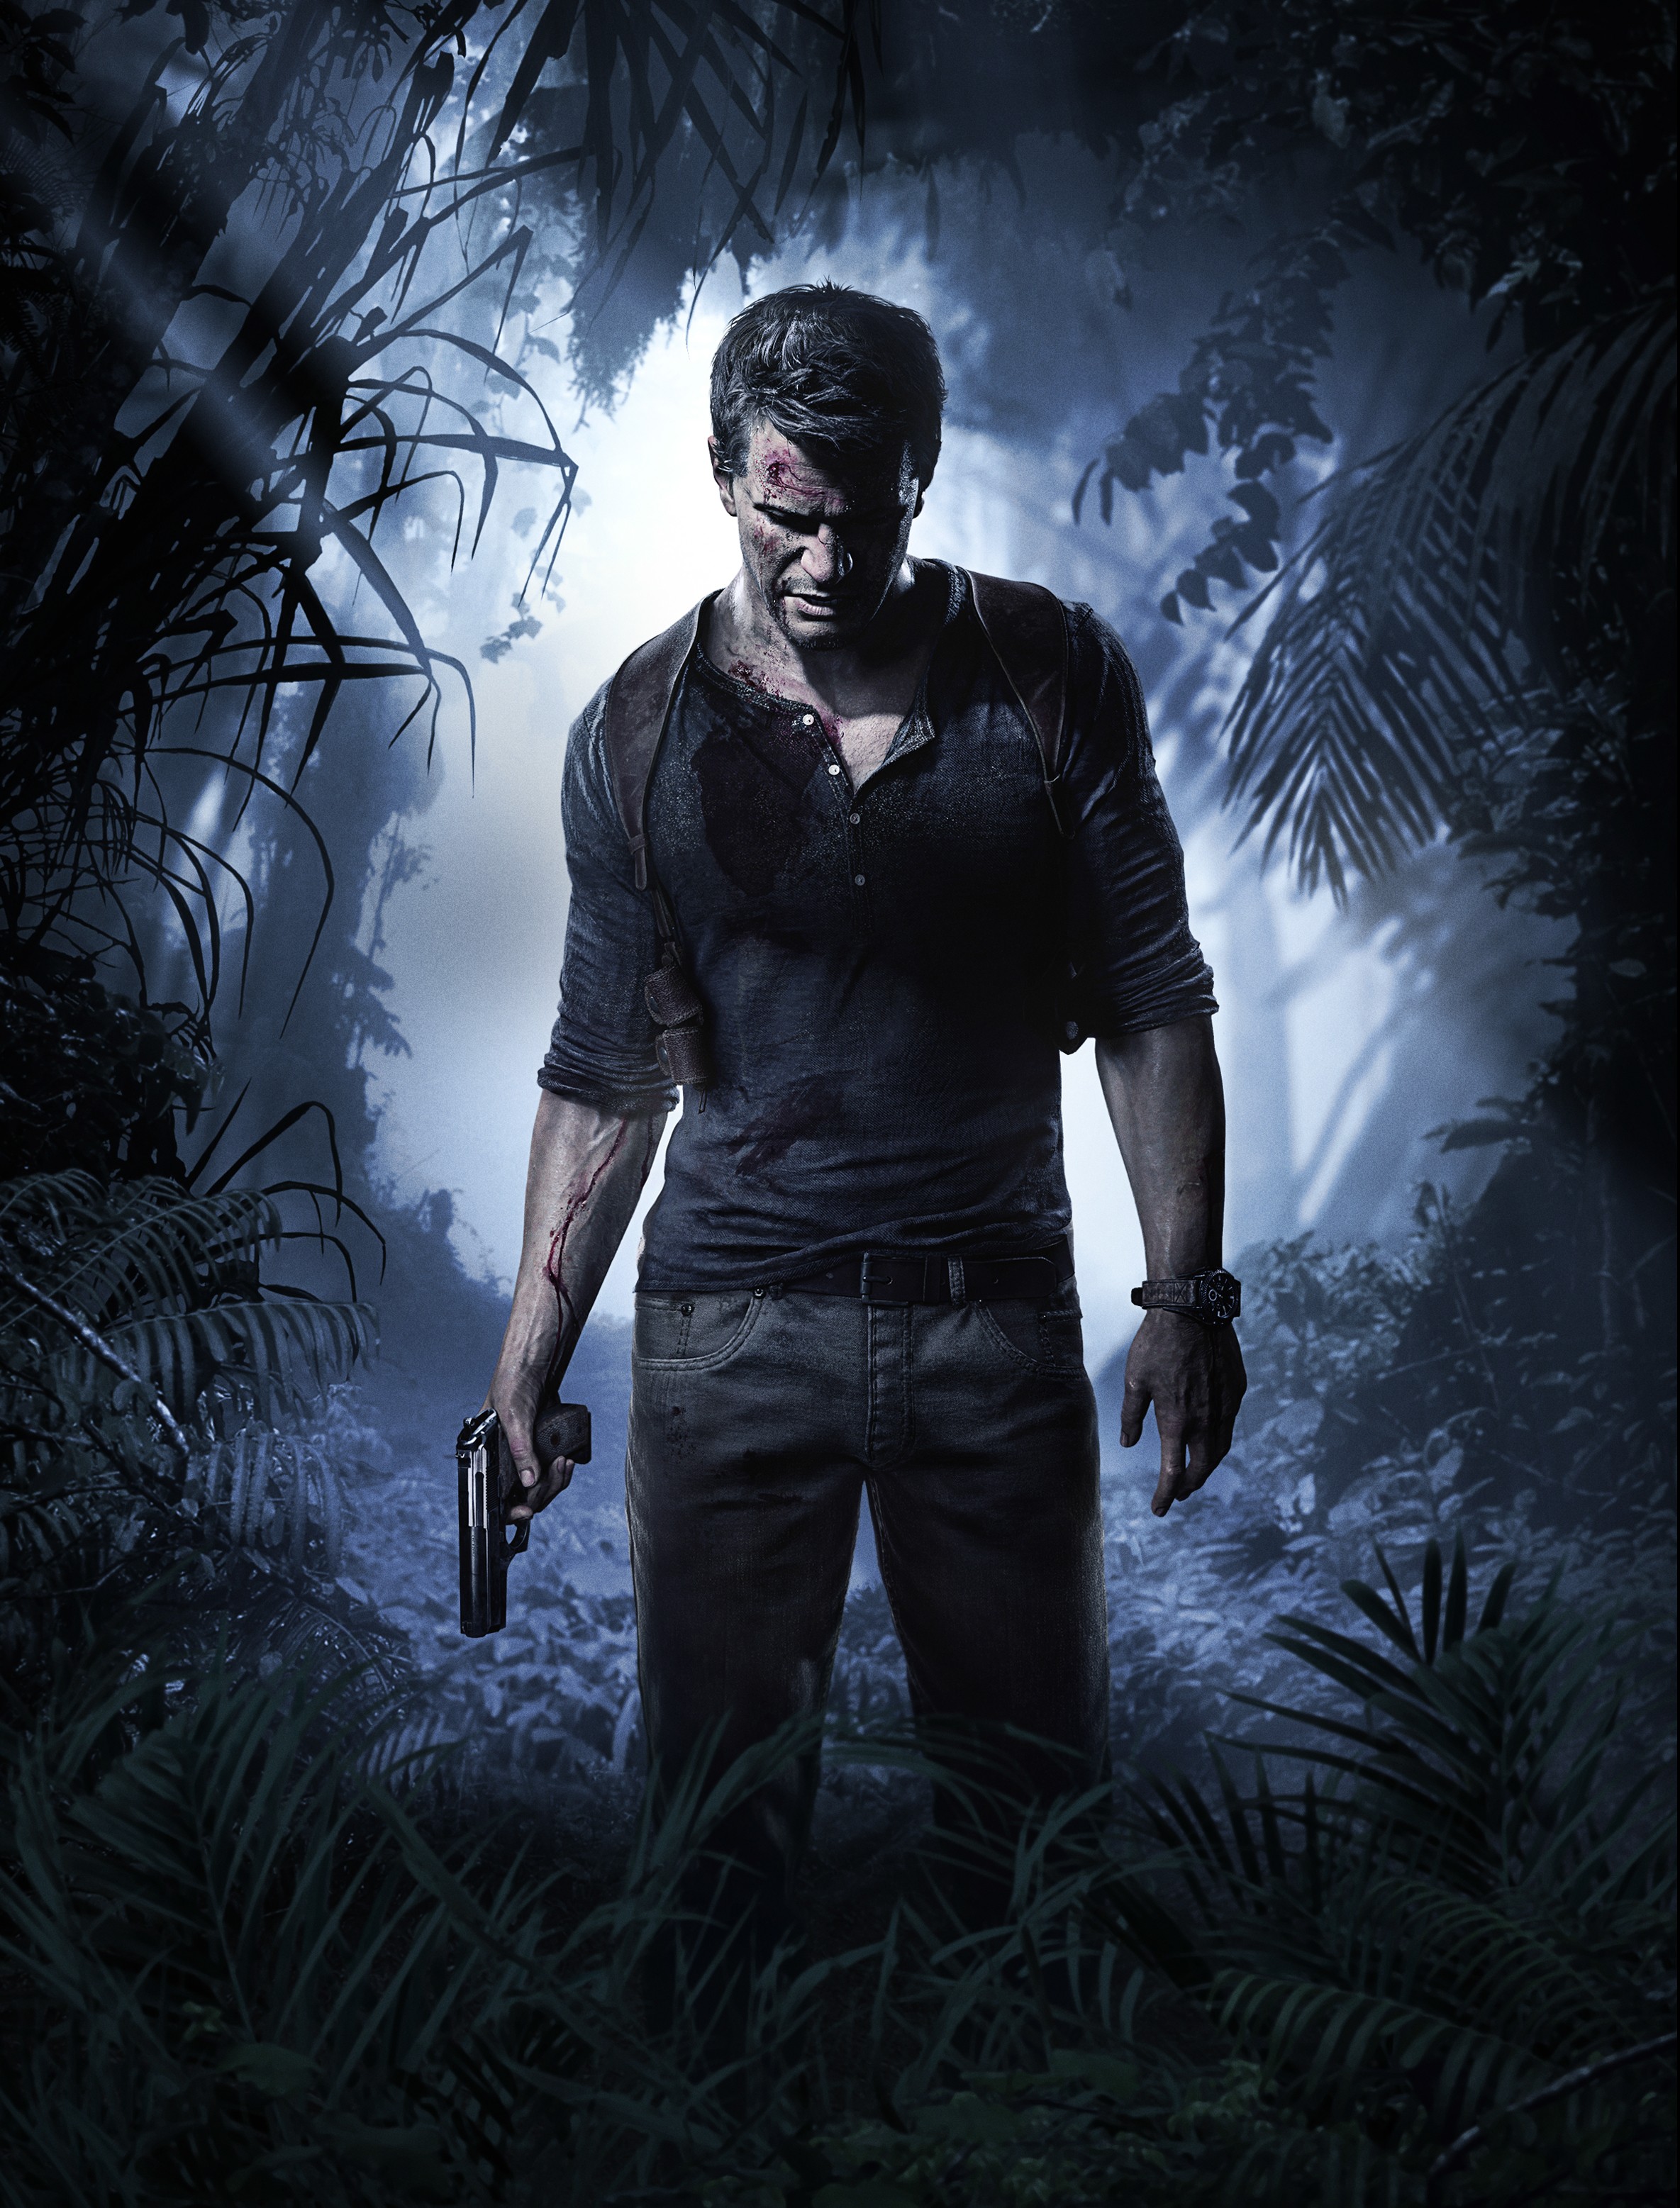 General 2369x3114 Uncharted 4: A Thief's End video games Video Game Heroes video game art gun video game men video game characters